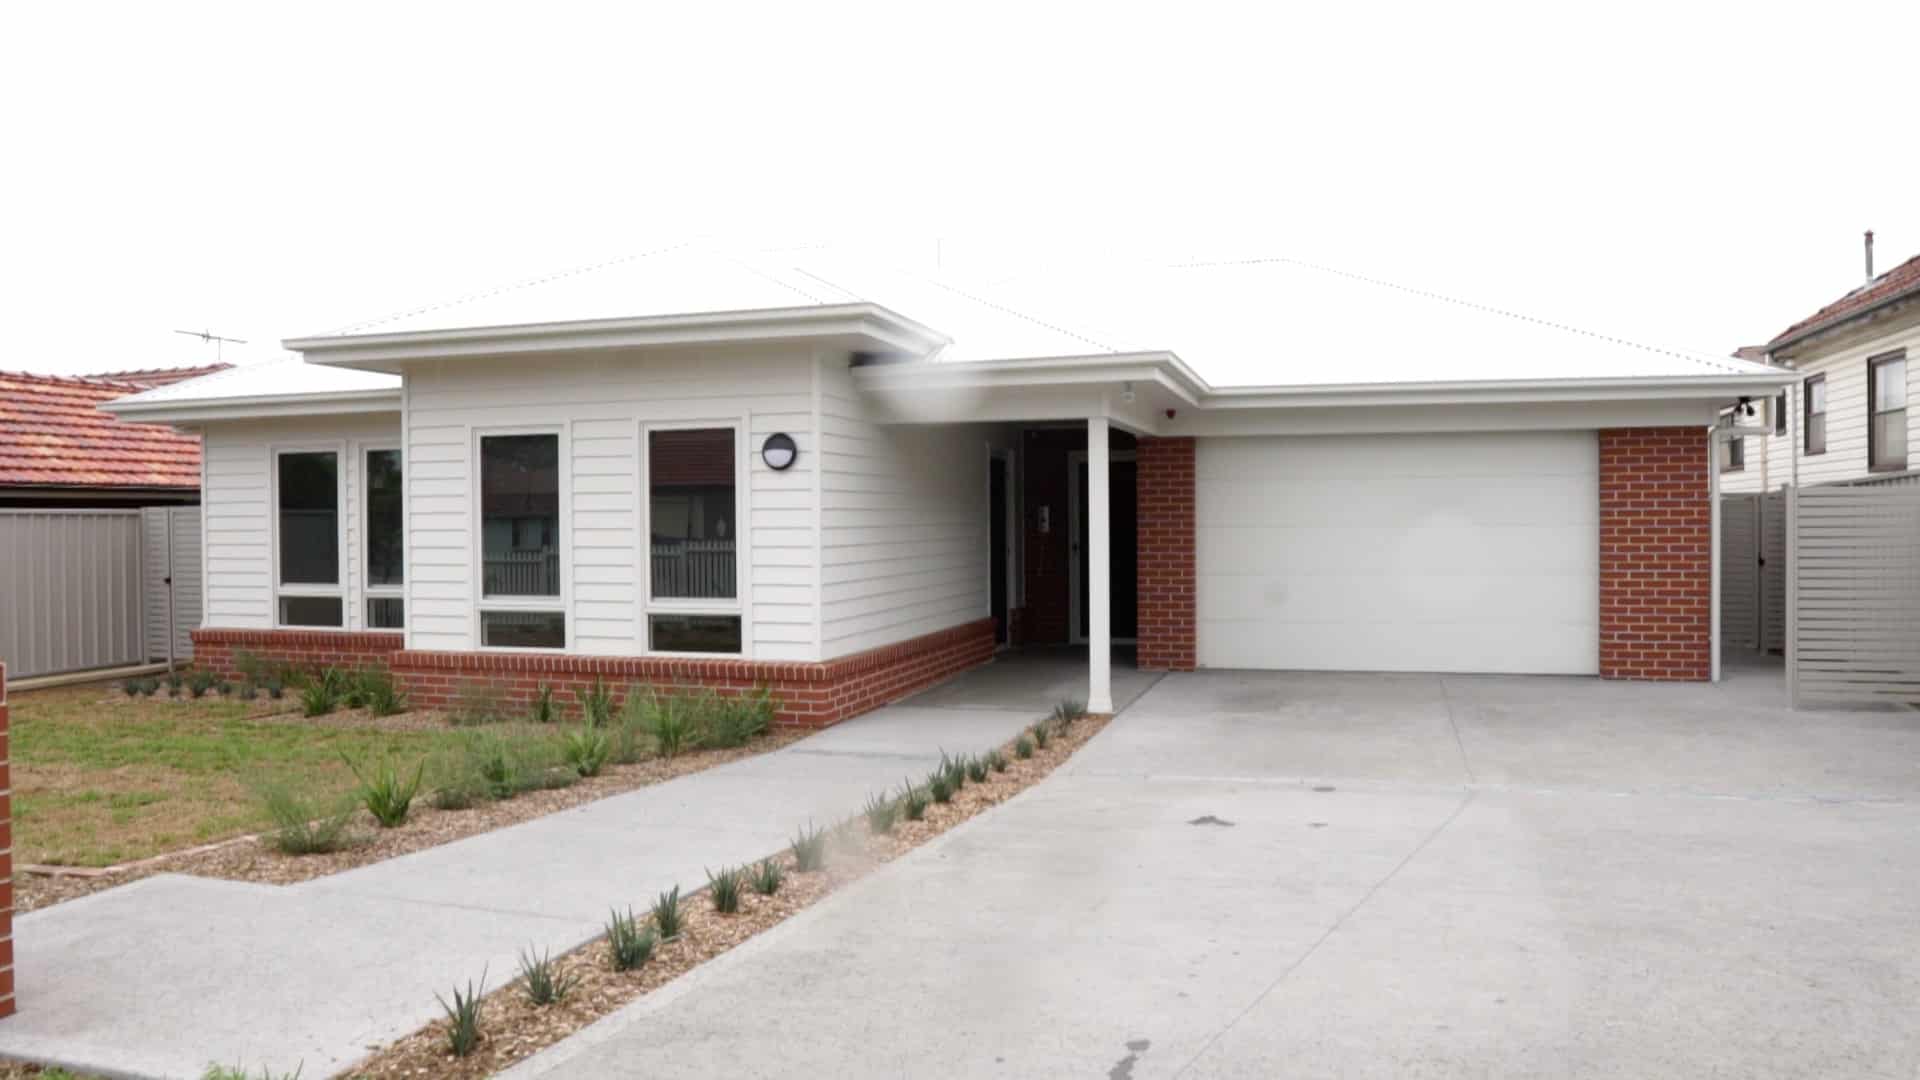 Front view of the home with secure garage and front garden